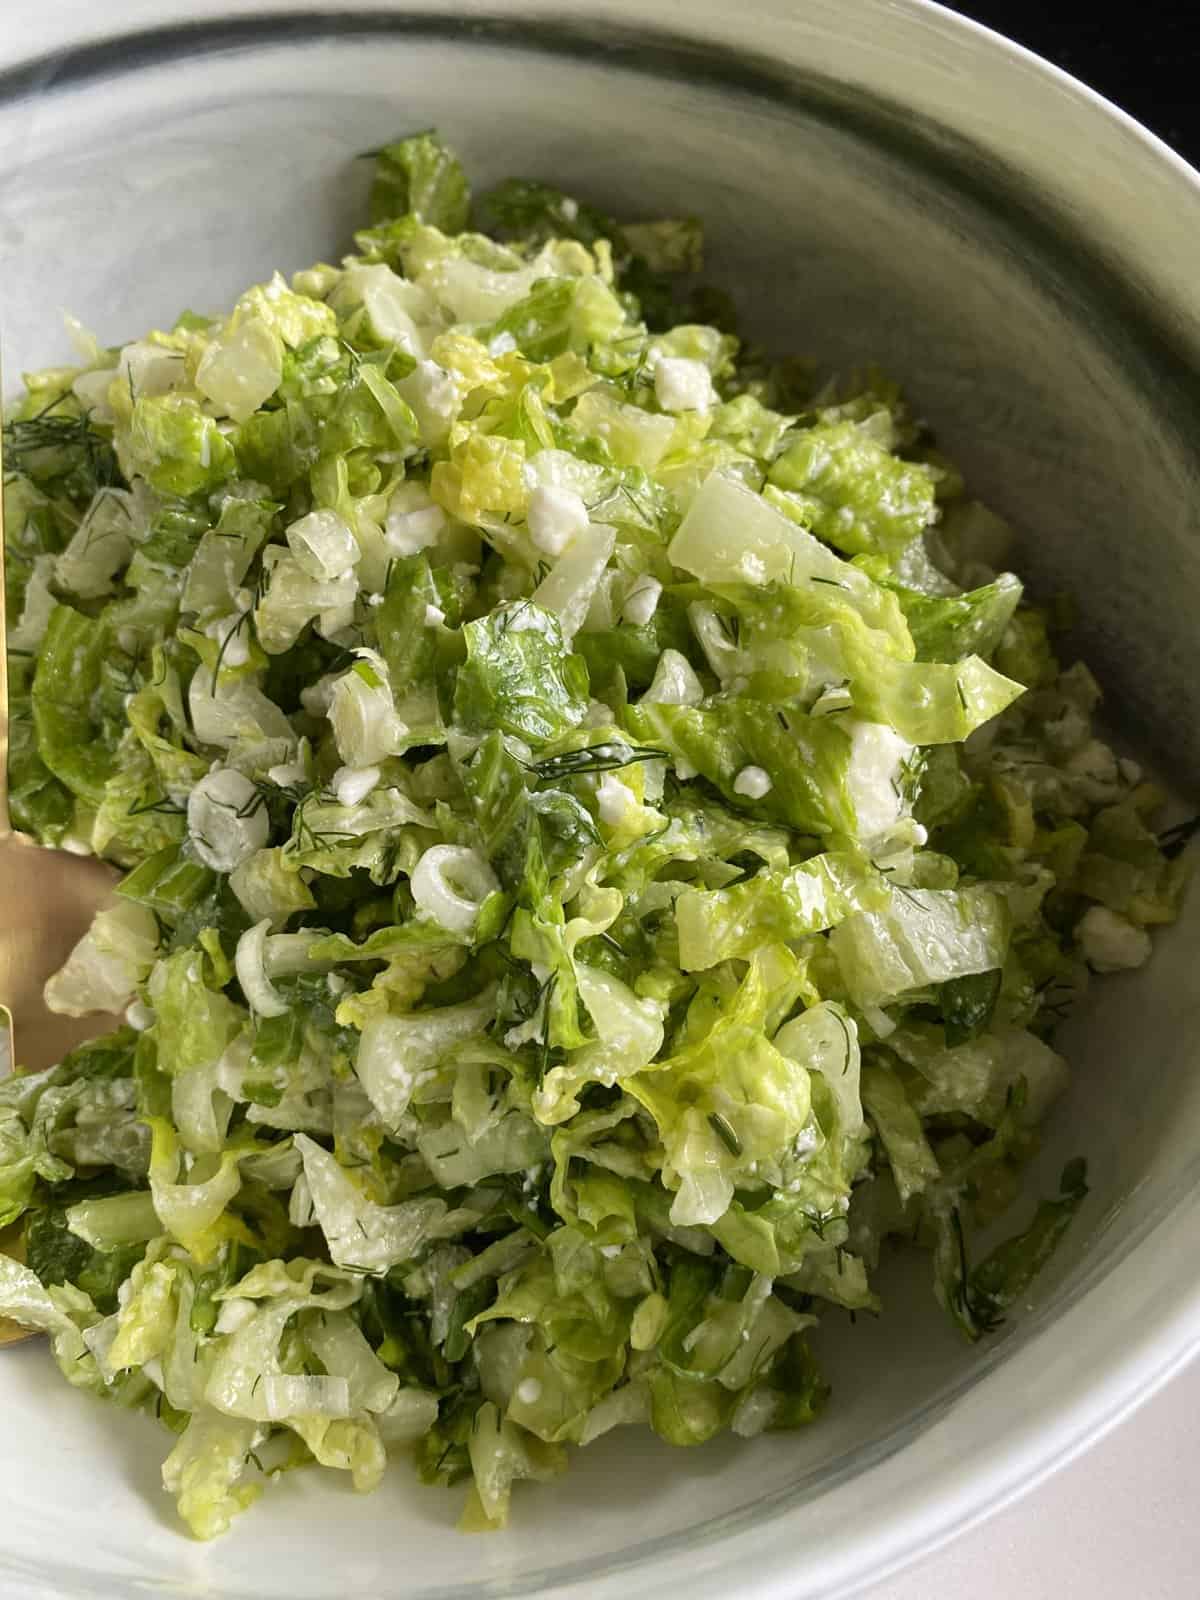 The Fastest Way To Dry Lettuce - How To Dry Salad Greens 